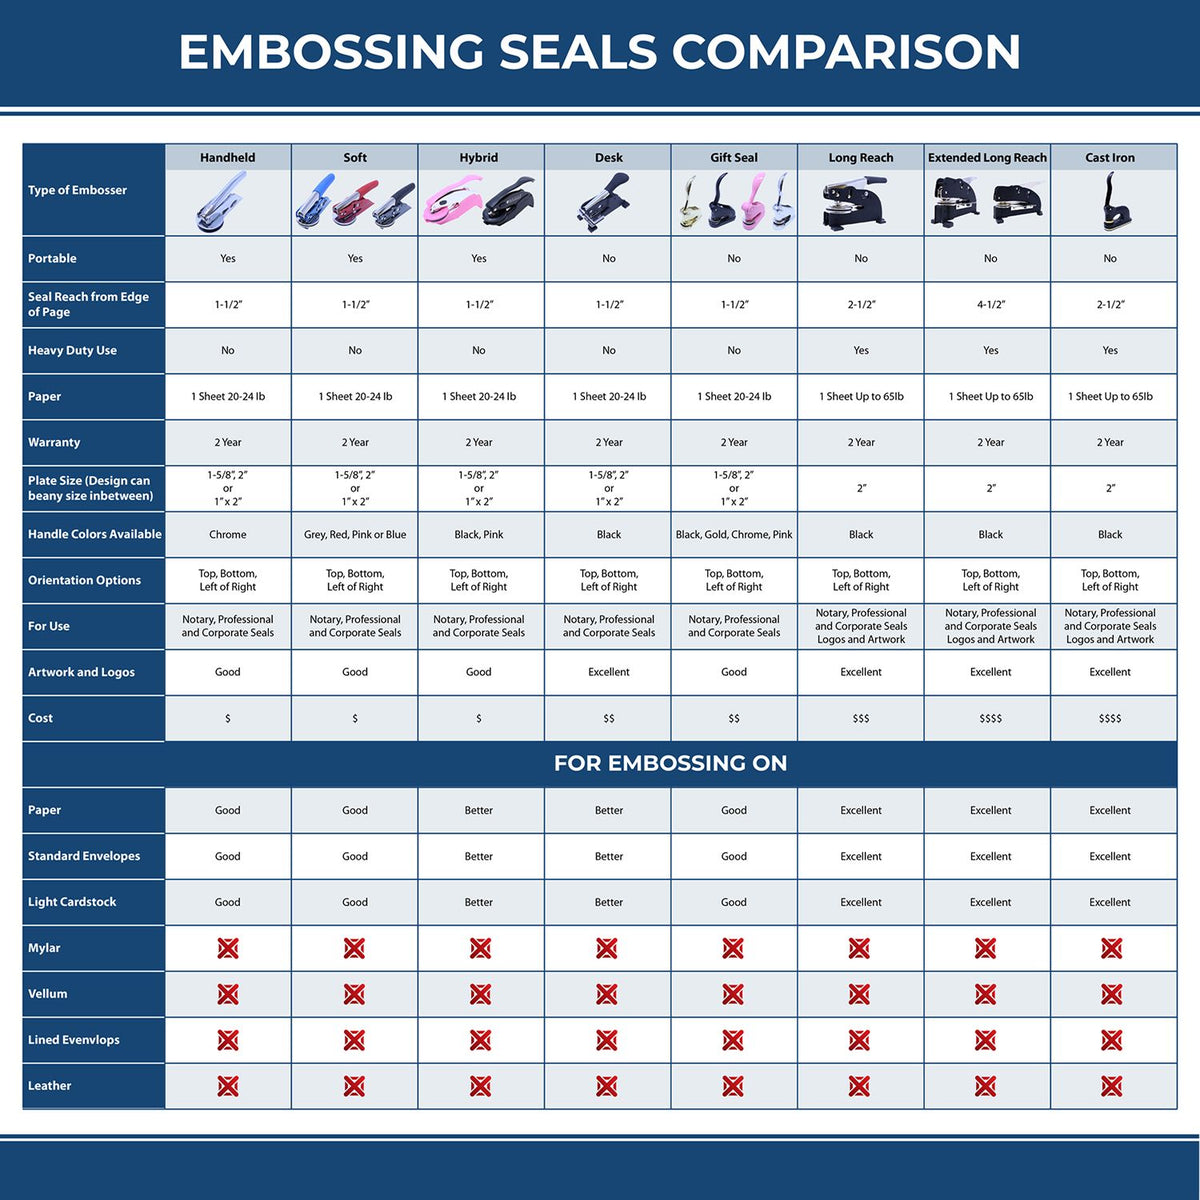 A comparison chart for the different types of mount models available for the Extended Long Reach Illinois Architect Seal Embosser.